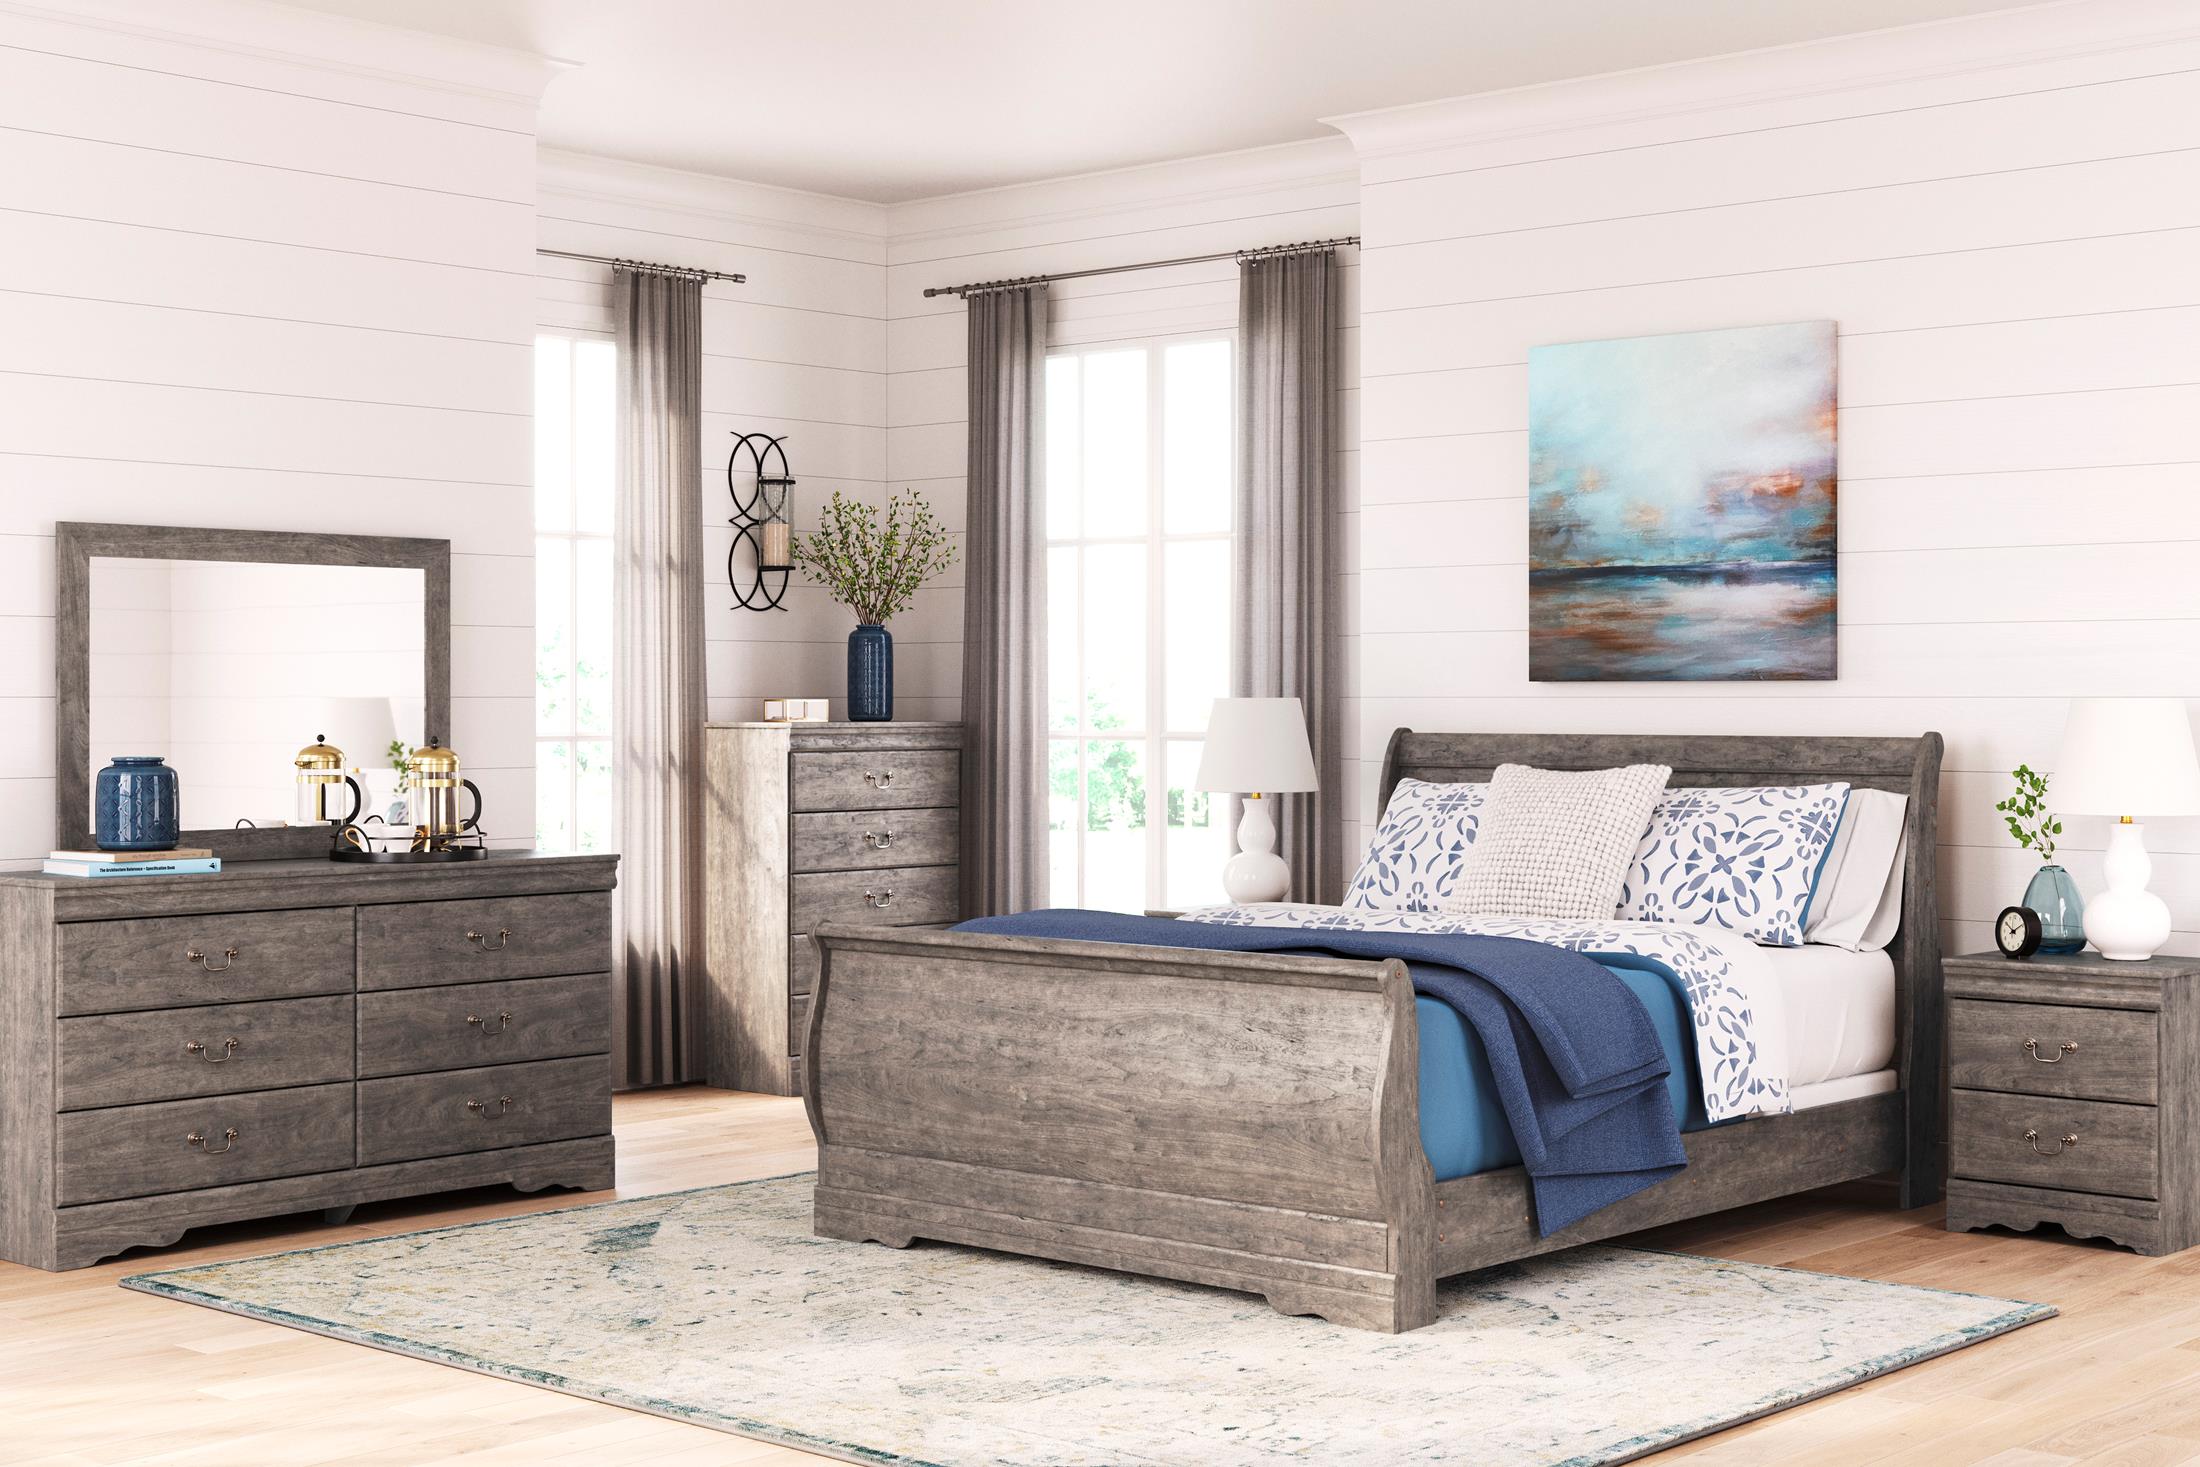 The Bayzor Bedroom Collection